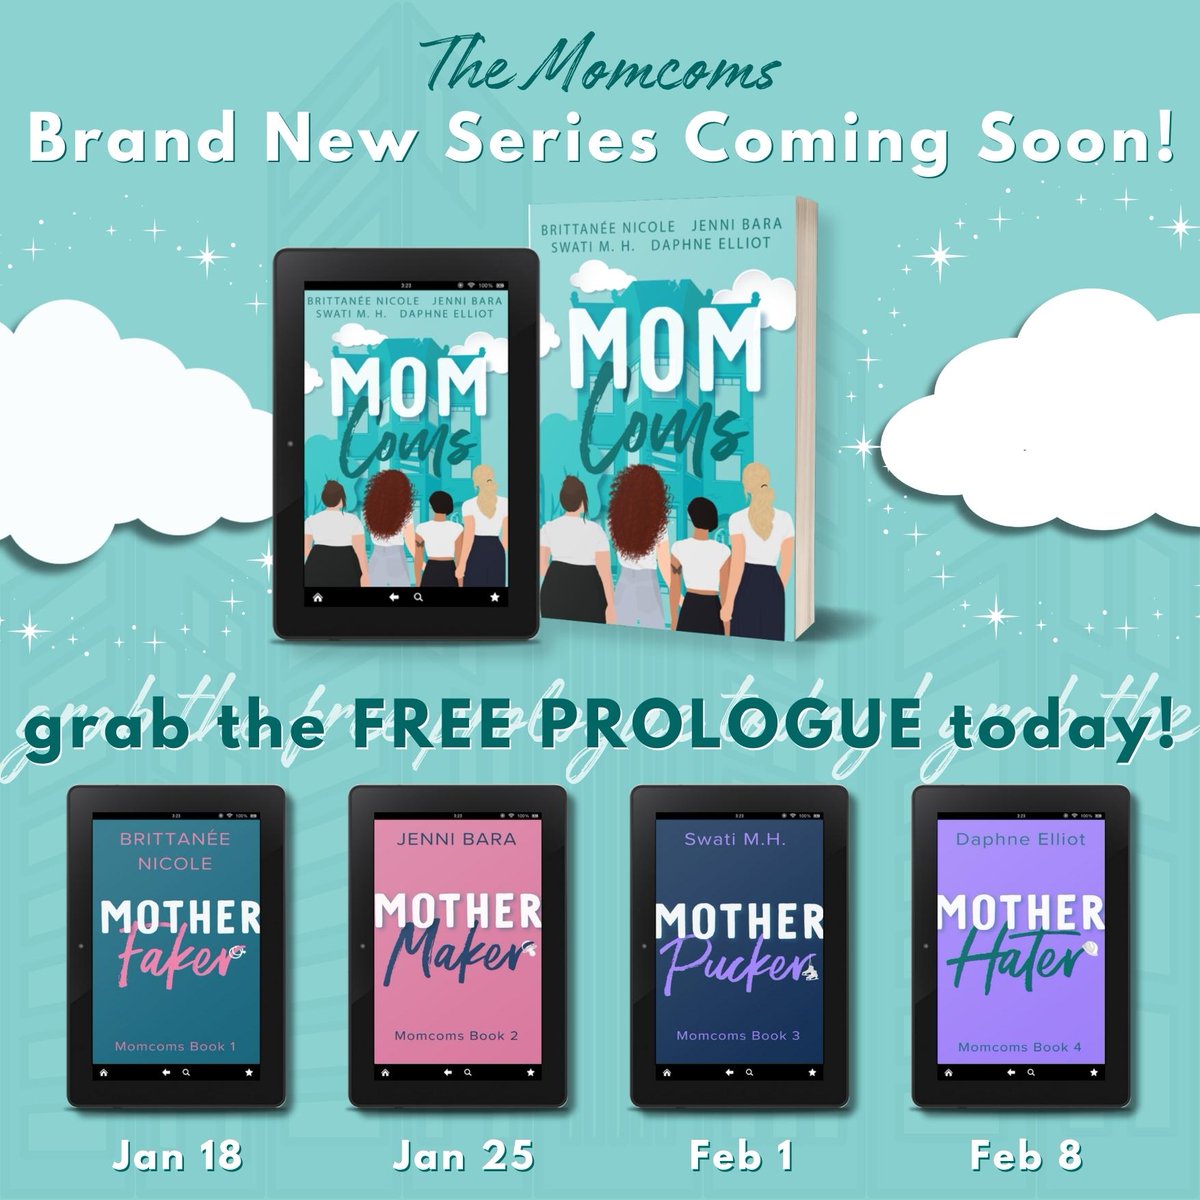 ✨BRAND NEW SERIES✨ Get ready for the MOMCOMS, coming soon from Brittanée Nicole, Jenni Bara, Swati M.H. and @elliot_daphne
✨Start the series with a free prologue today
dl.bookfunnel.com/4rpdejphdb
#brittaneenicole #jennibara #daphneelliot #swatimh #newseriesalert #theauthoragency